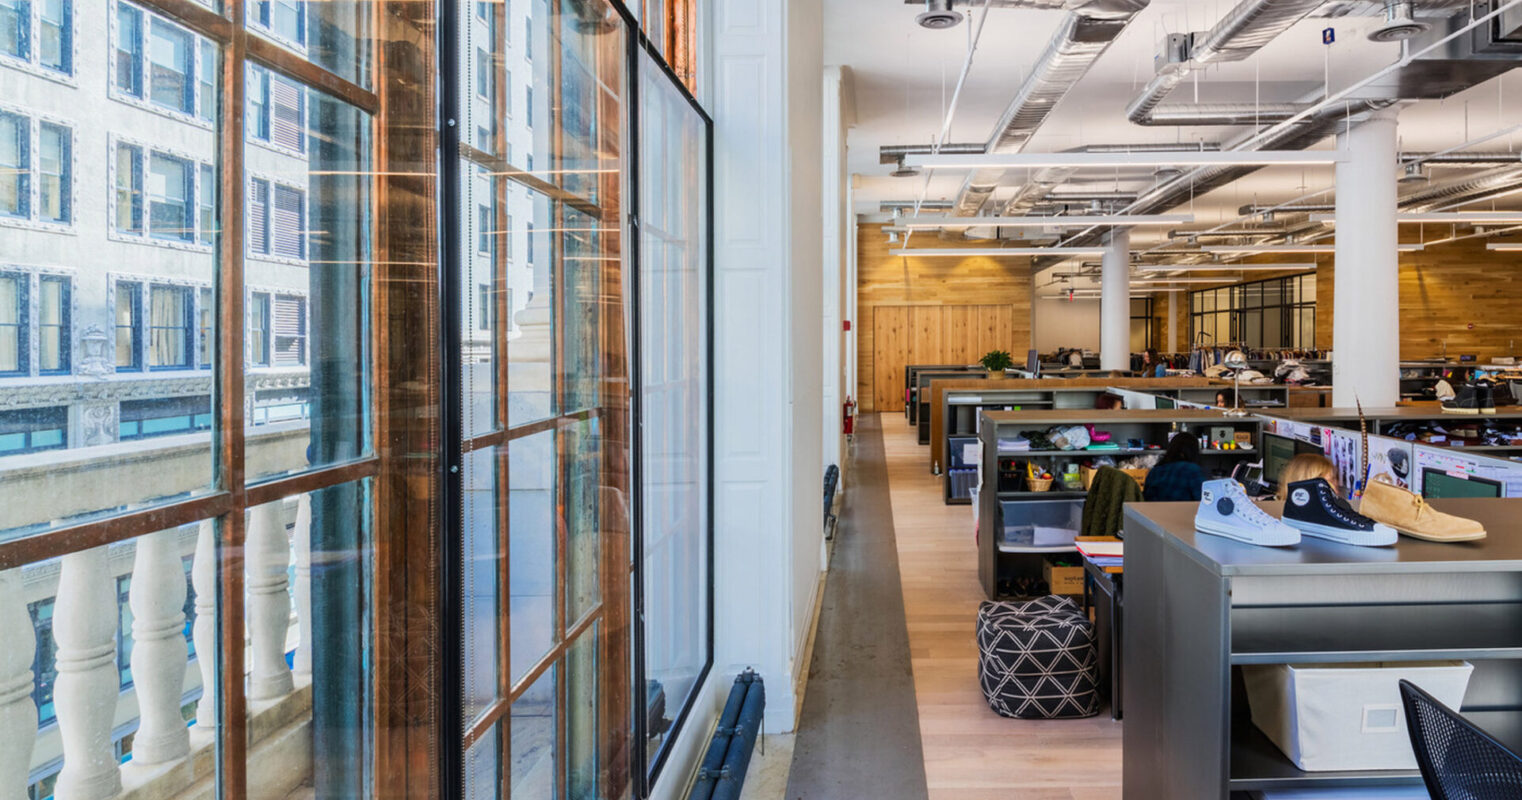 Modern office interior capitalizing on natural light with large, floor-to-ceiling windows flanked by exposed brick. Contemporary workstations with ergonomic chairs punctuate the open-plan space, complemented by warm wooden floors and a view of the urban exterior.